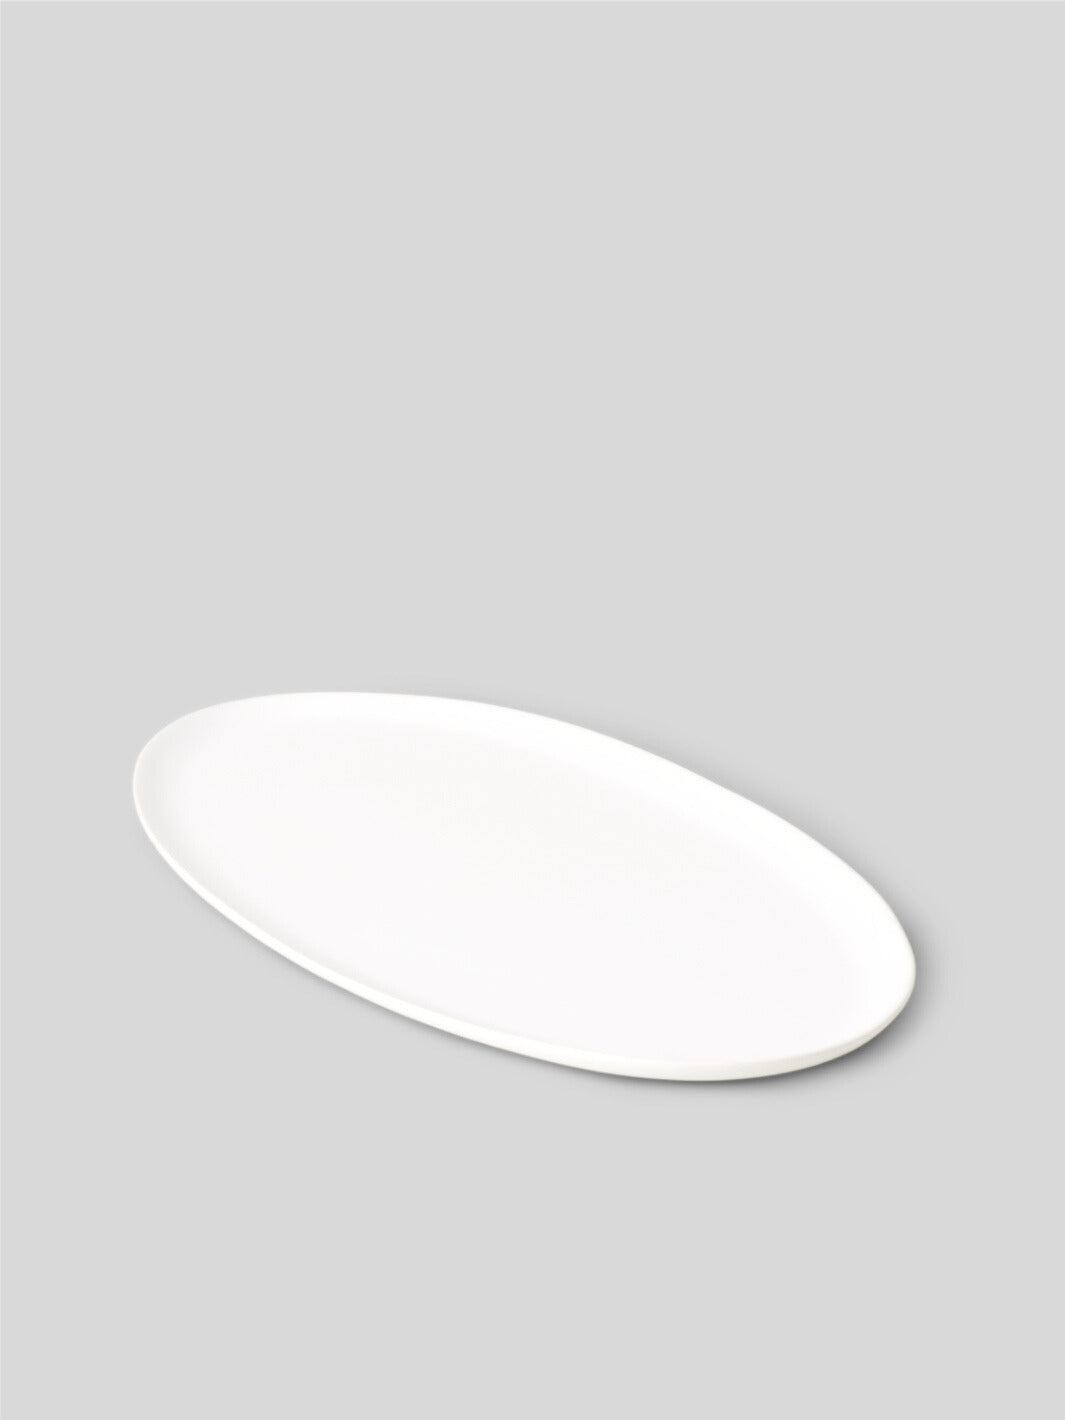 FABLE The Oval Serving Platter